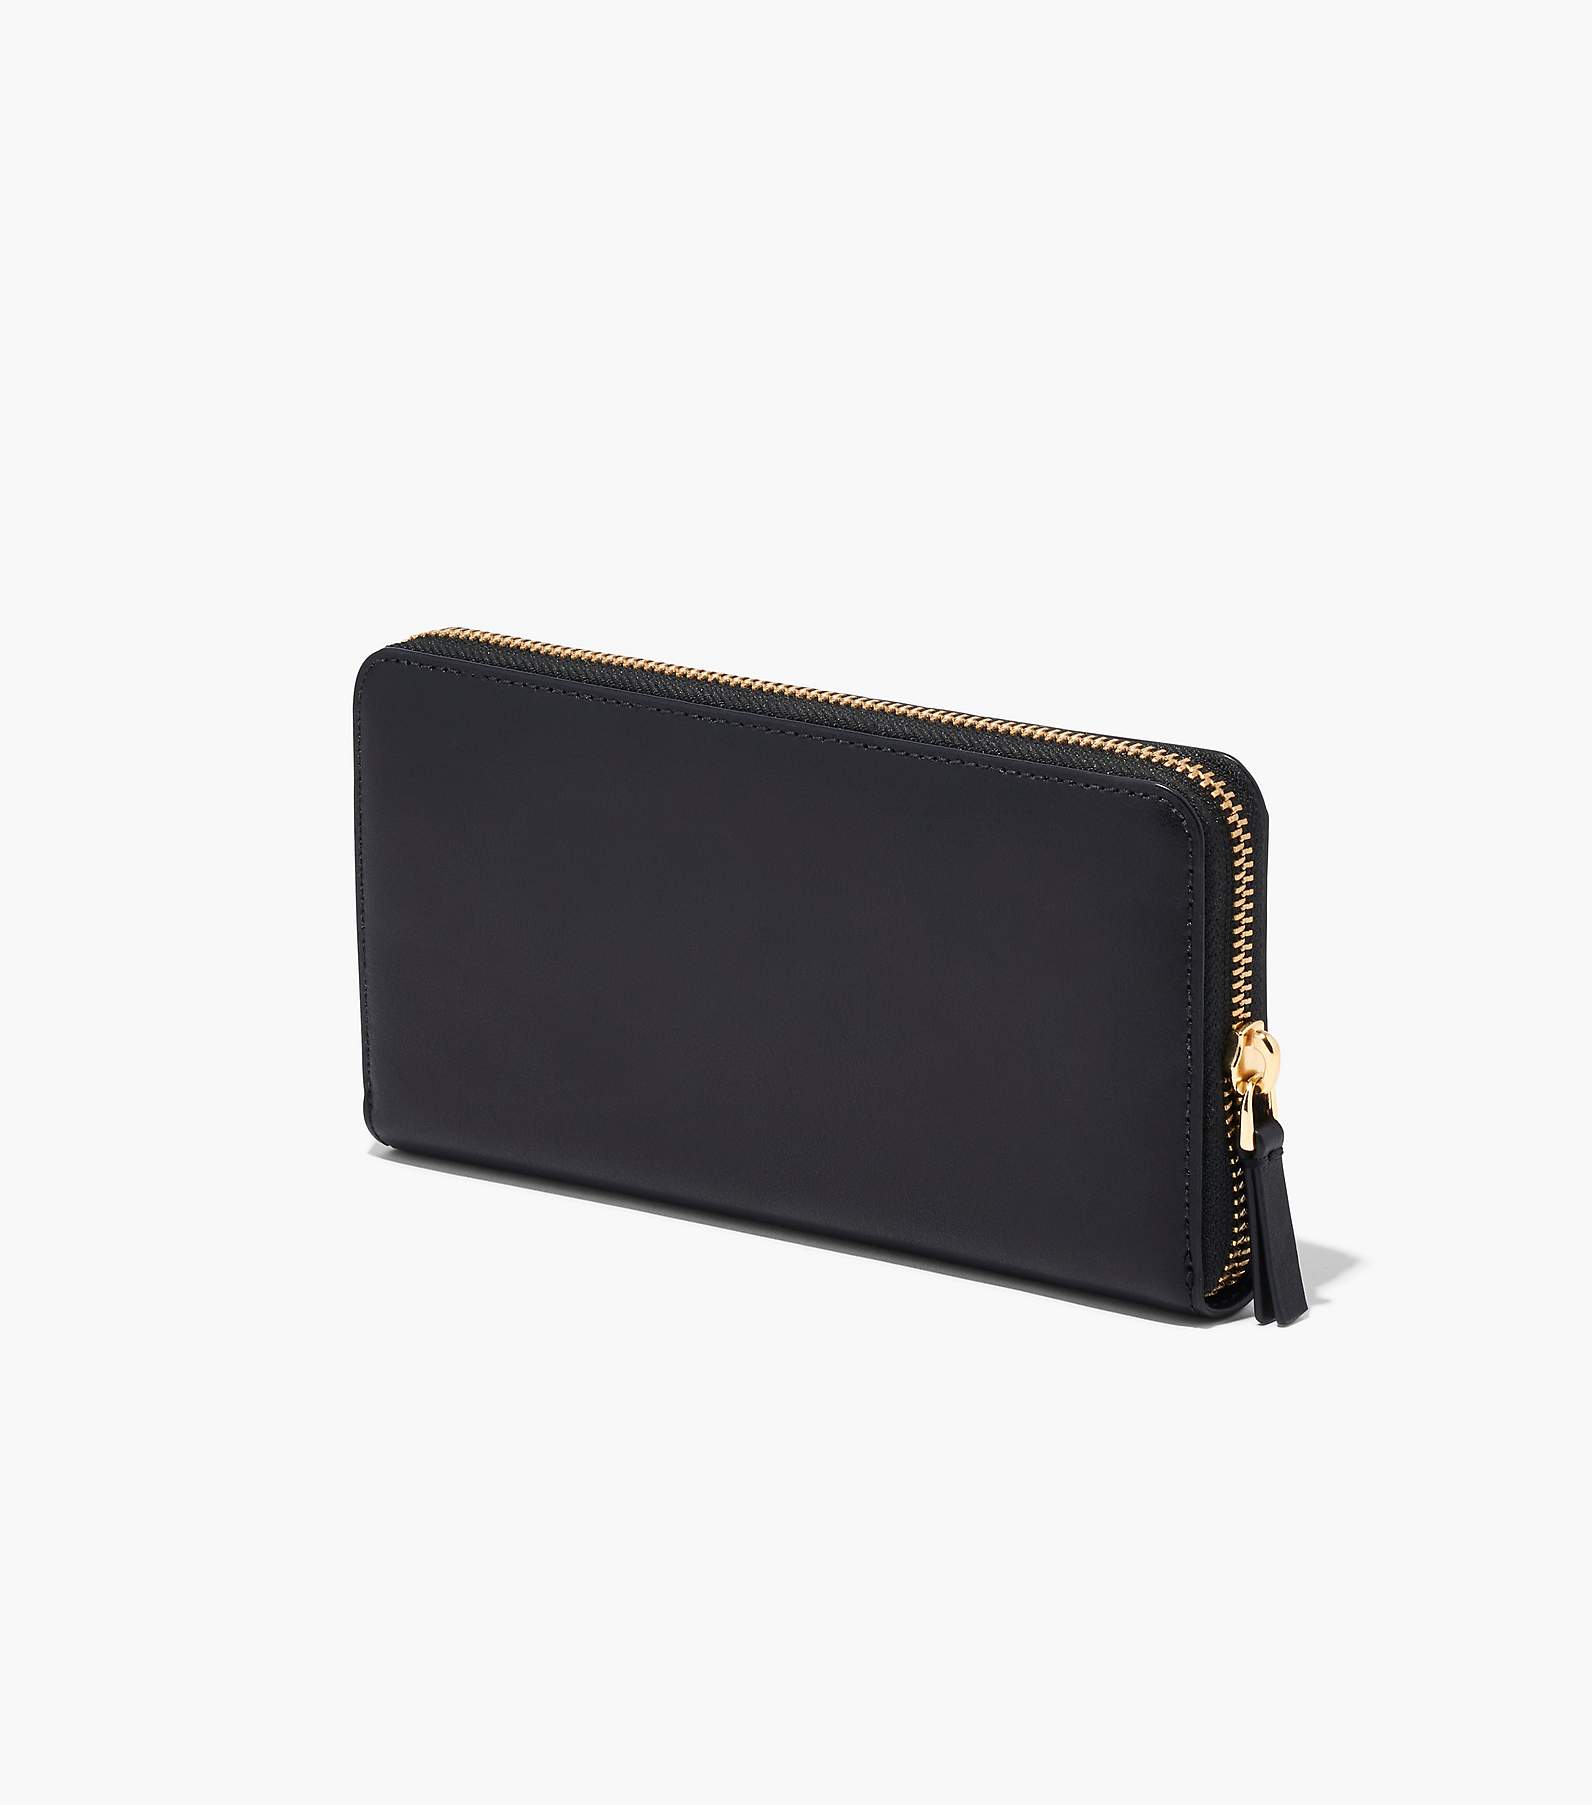 Marc Jacobs Vertical Zip-Around Continental Leather Wallet in